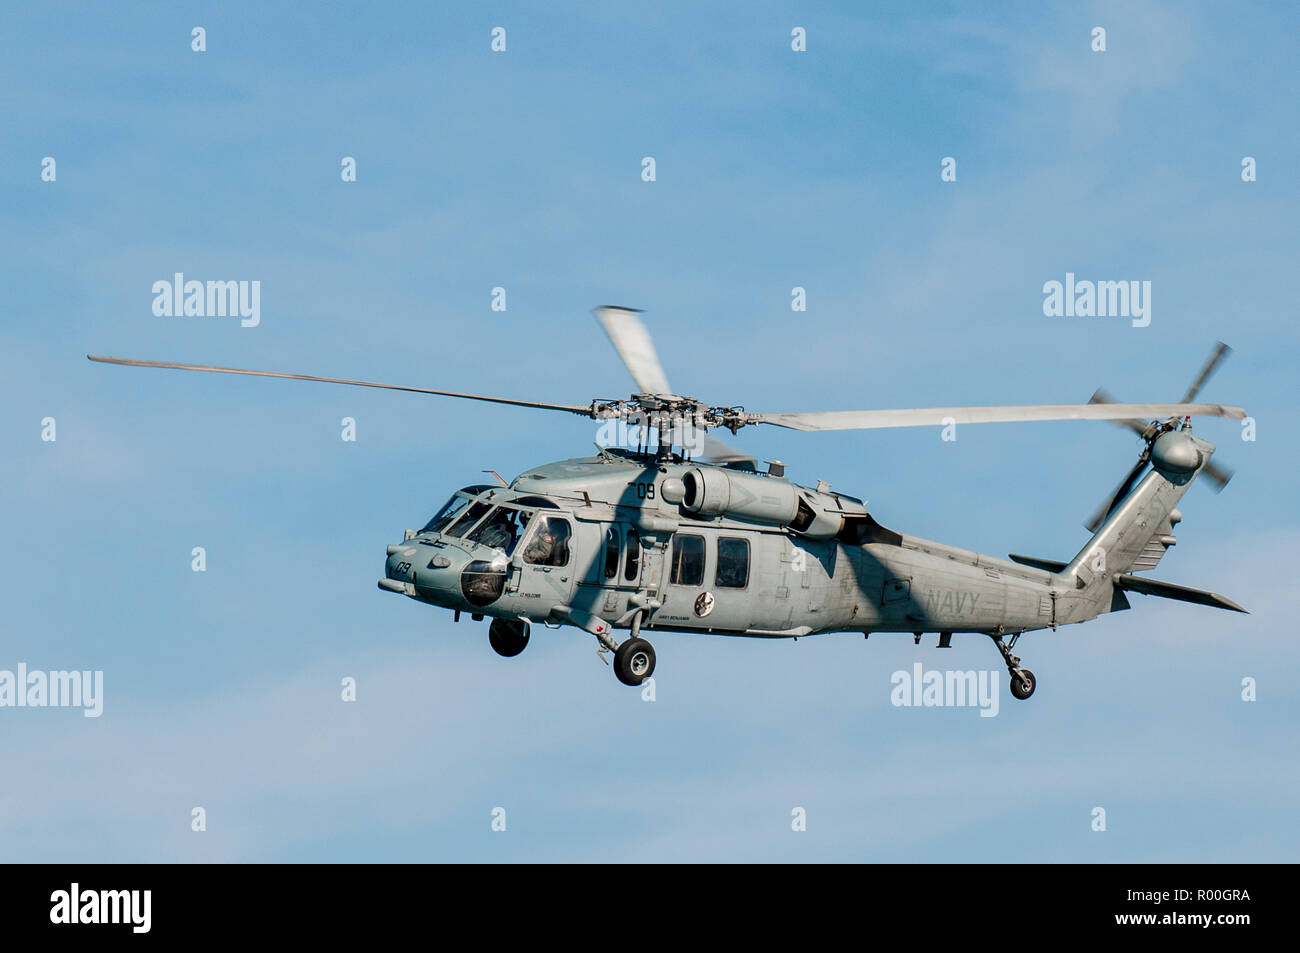 An HSC-3 Merlins helicopter, San Diego Harbor, San Diego, California. Stock Photo